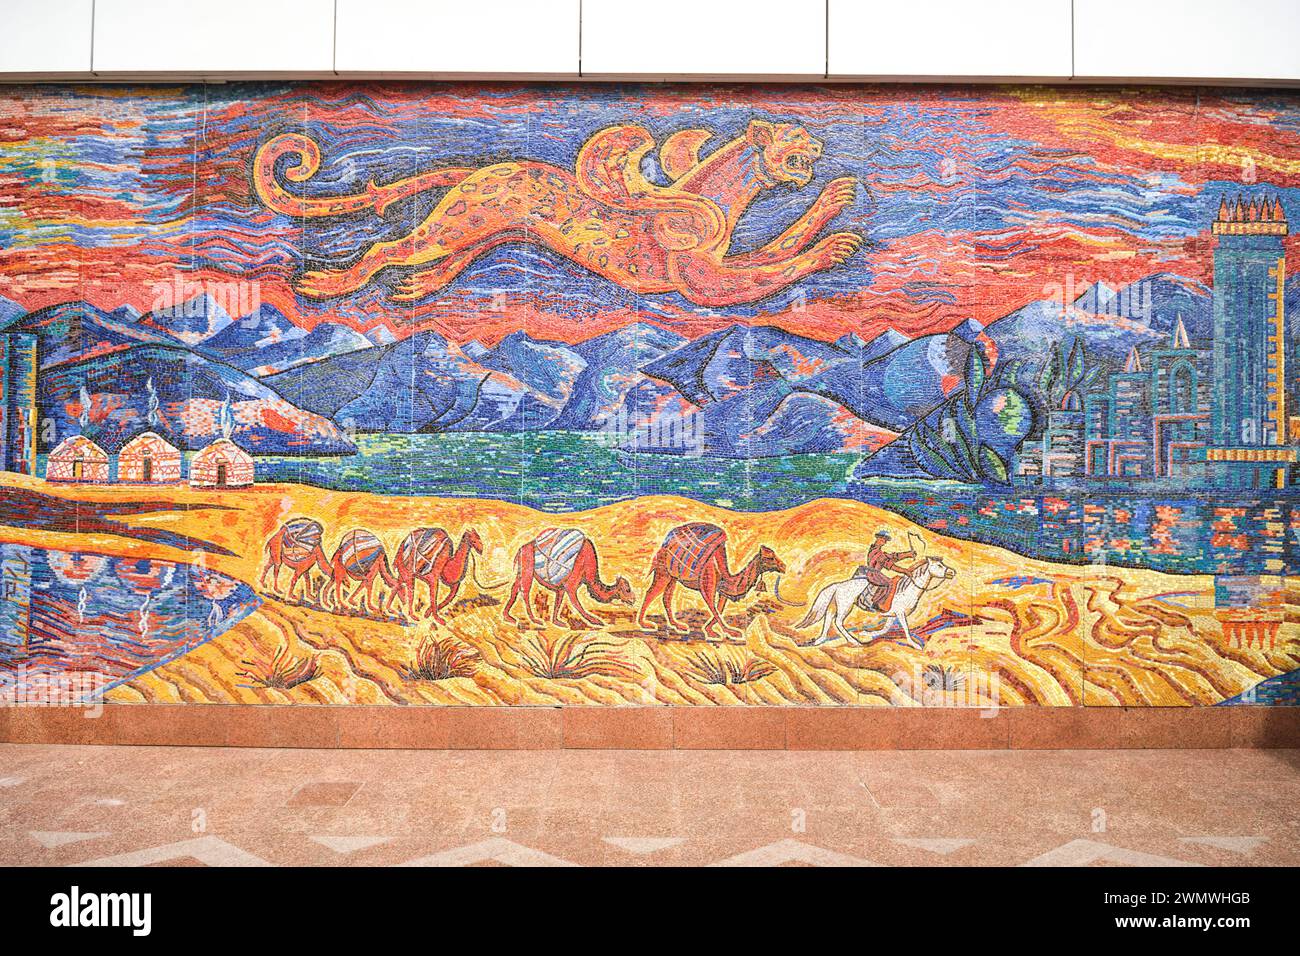 The large, colorful tile mosaic that depicts a camel caravan, traveling between the rural, old Silk Road to the modern, skyscraper city. At the front Stock Photo